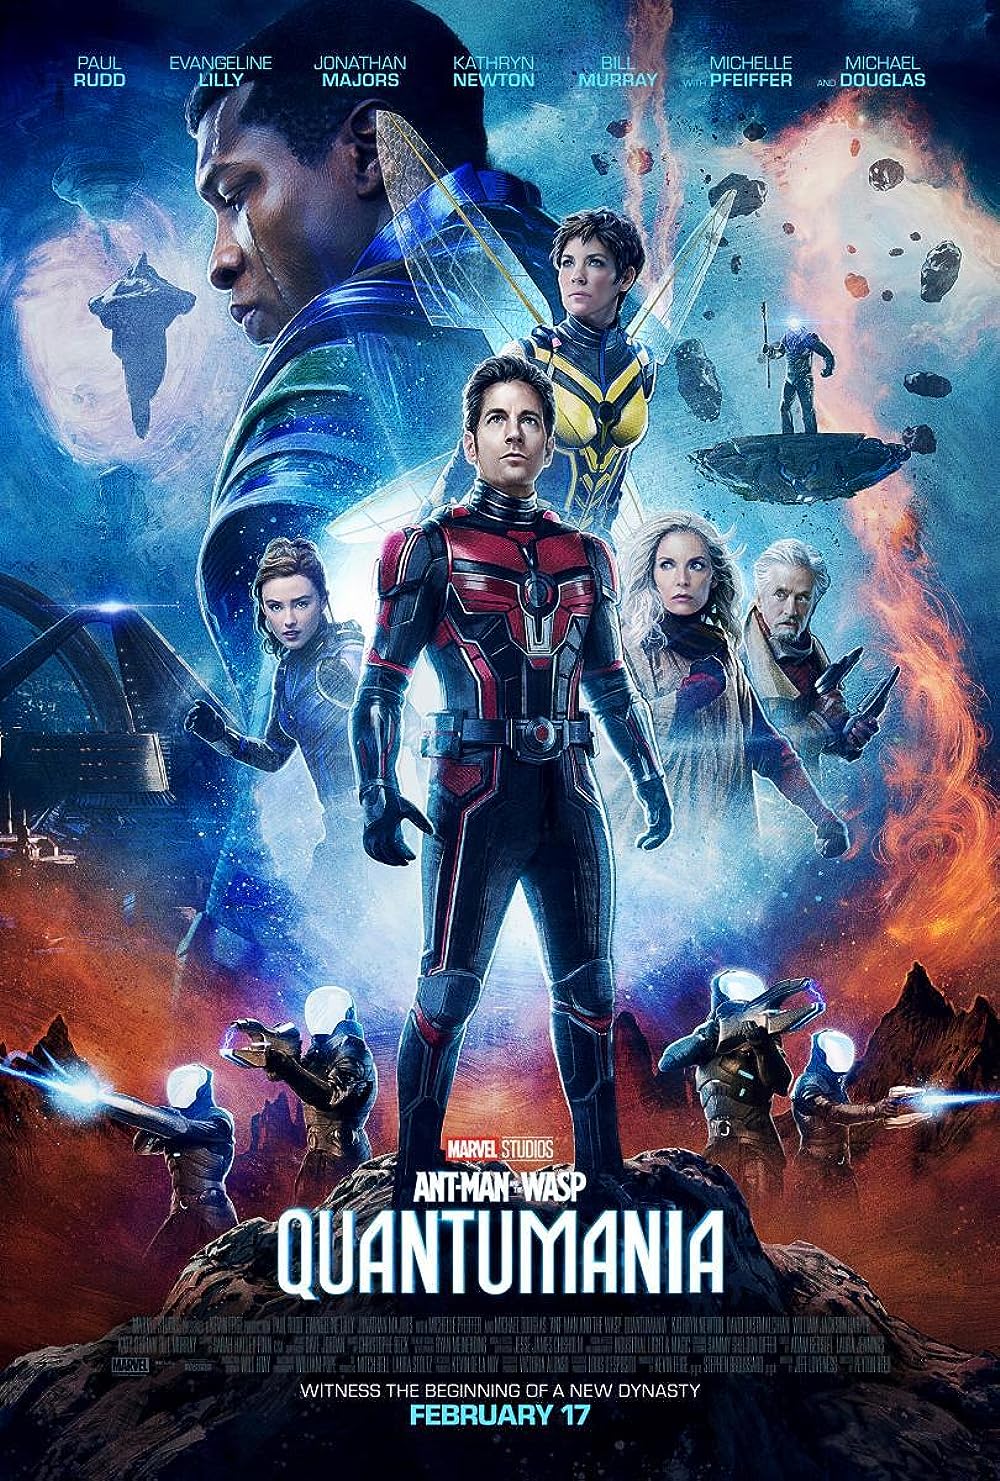 Download Ant-Man And The Wasp: Quantumania (2023) Hindi Dubbed Movie HQ-HDRip || 480p [450MB] || 720p [1GB] || 1080p [2.1GB]